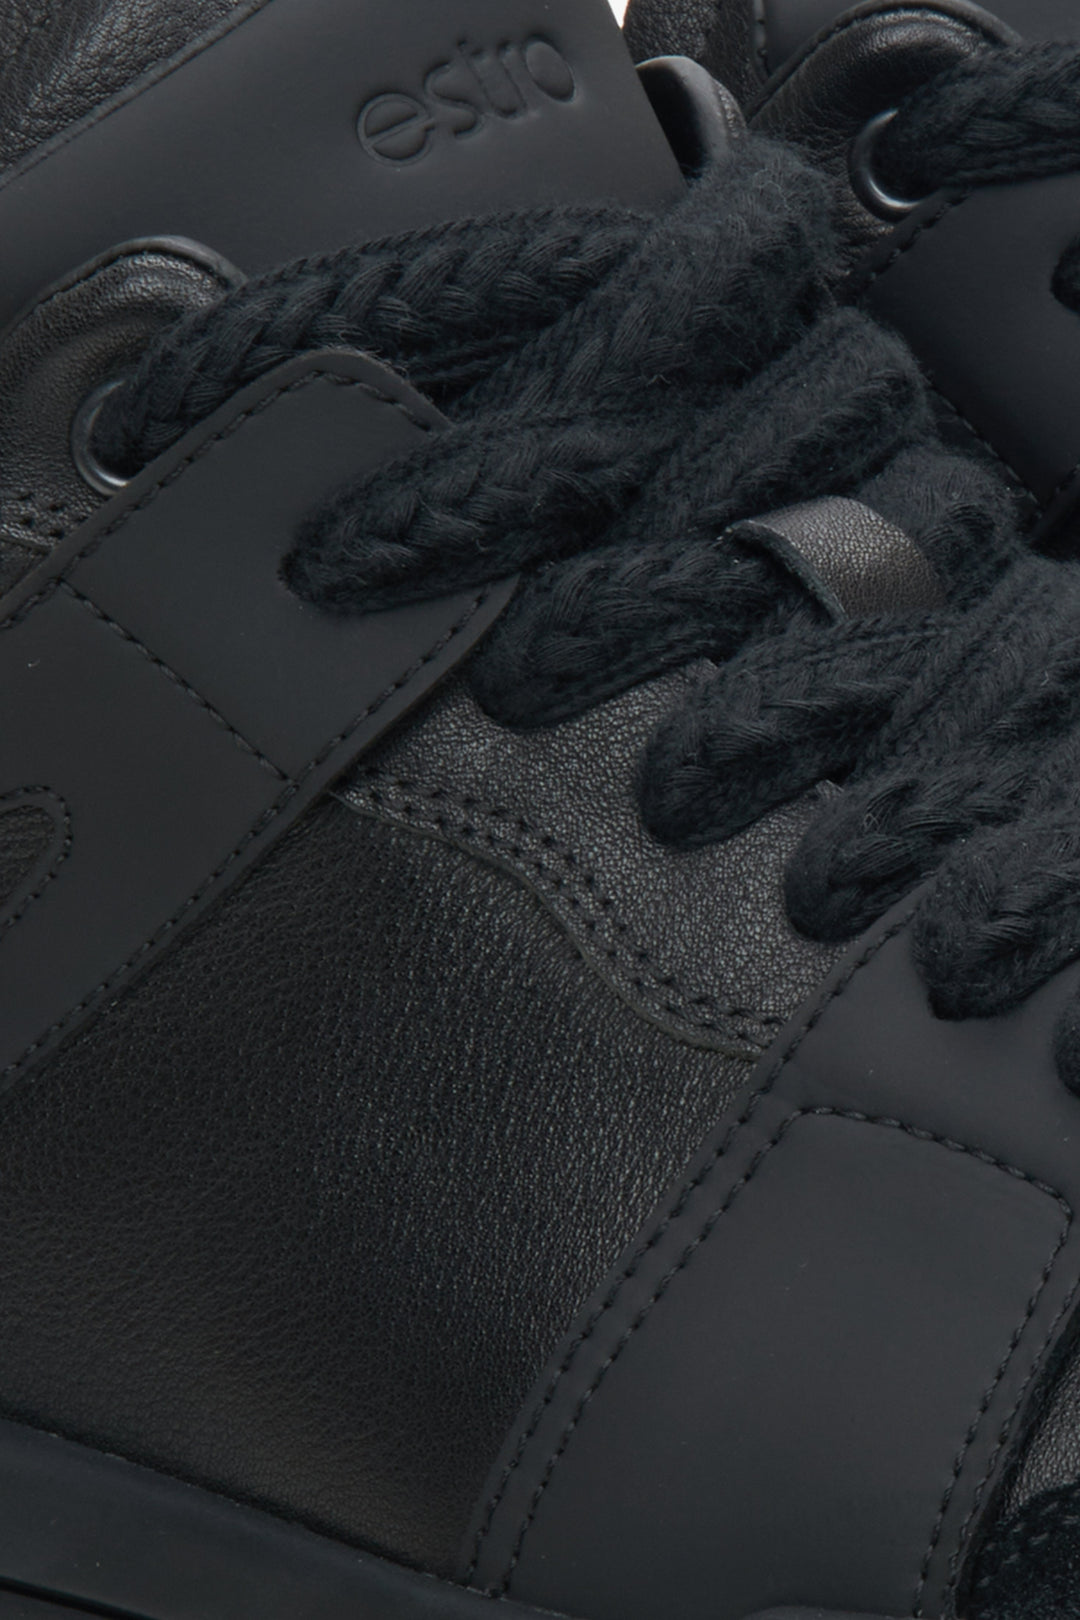 Men's black high-top sneakers by Estro - close-up on details.